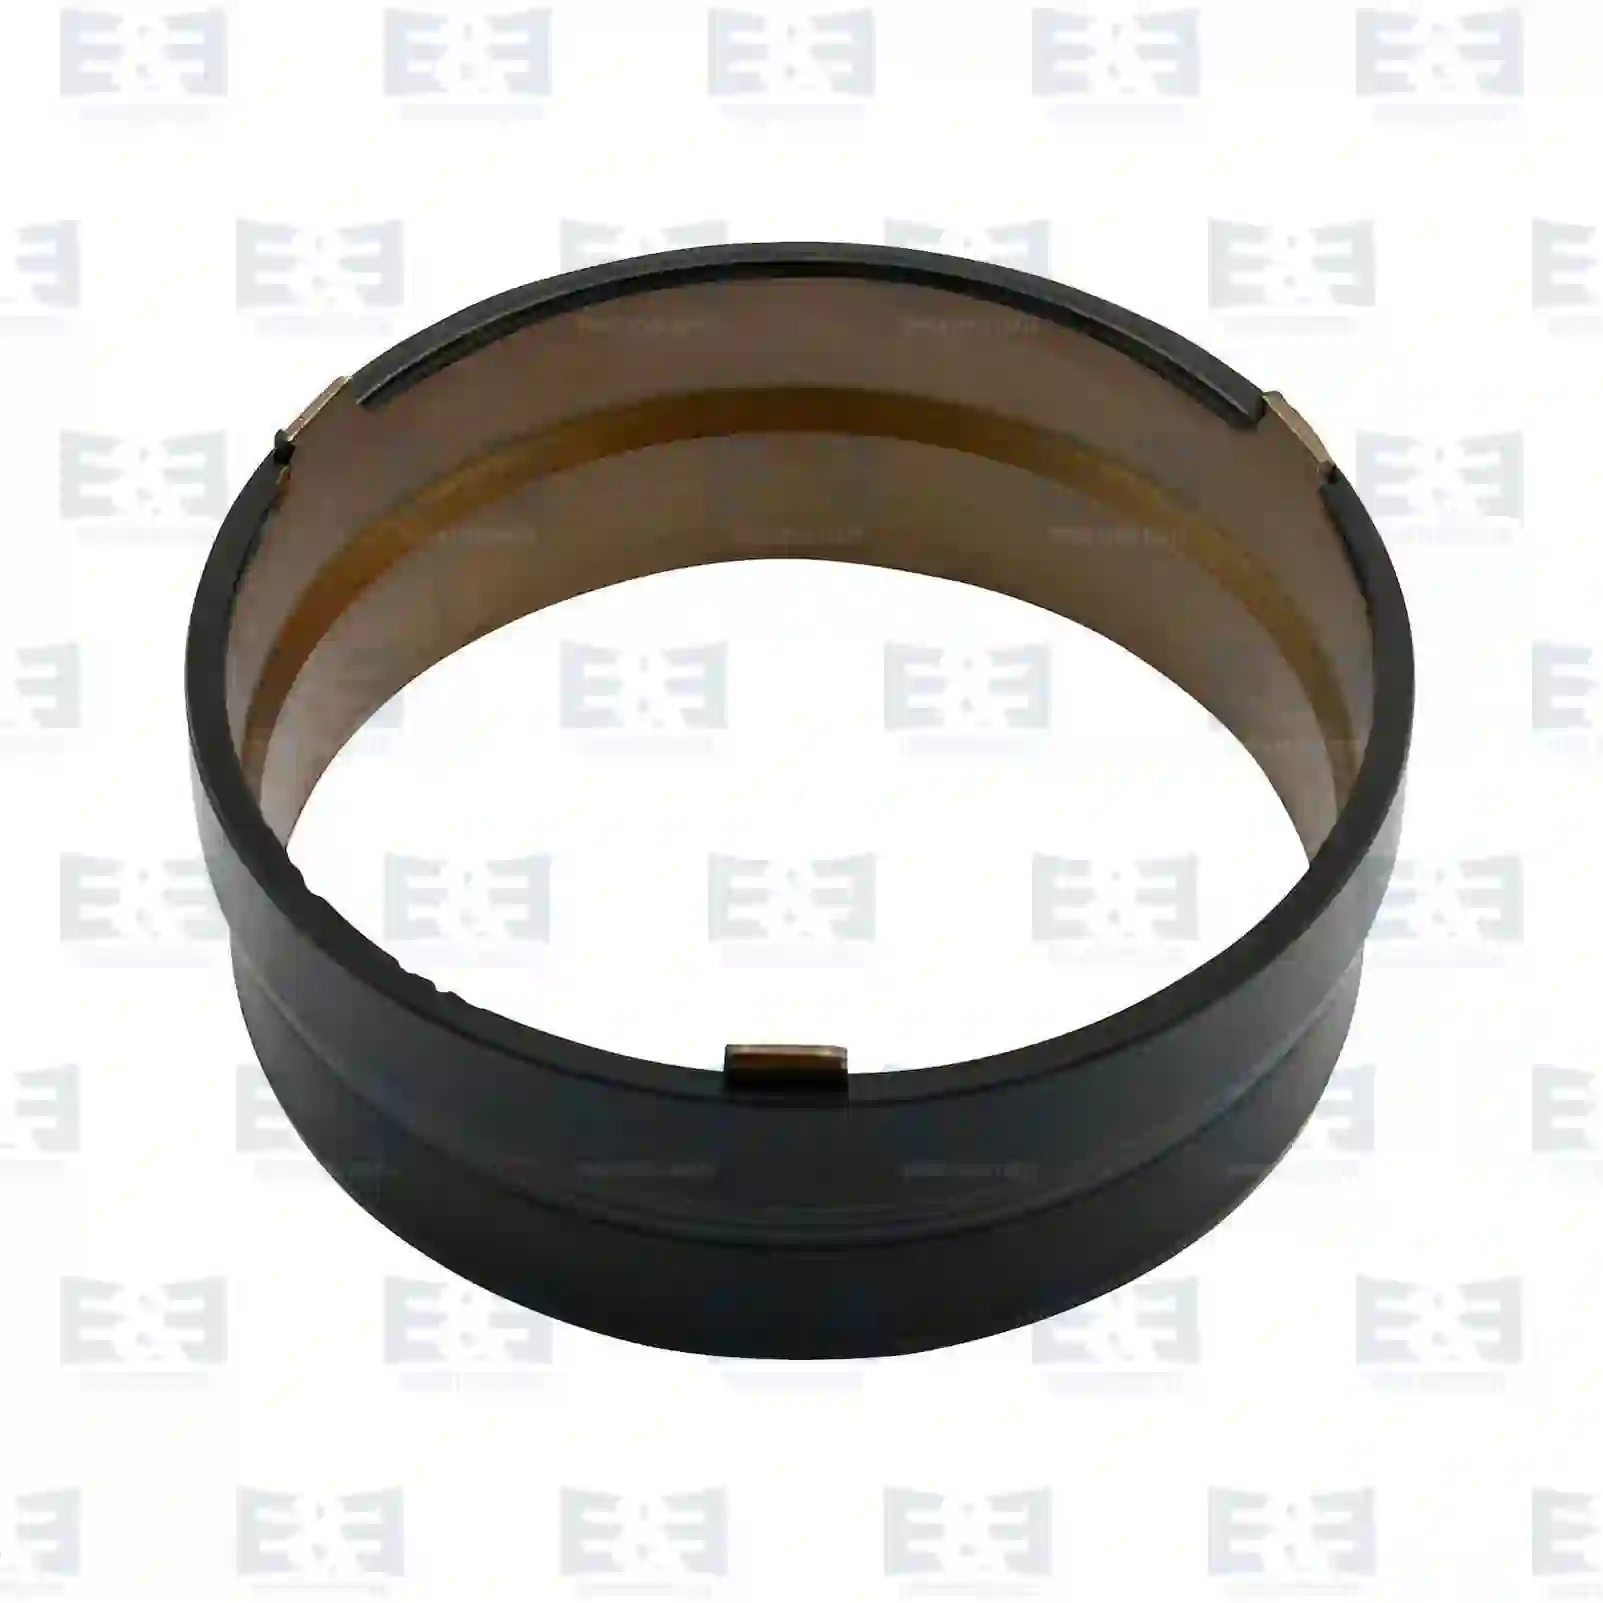  Seal ring holder || E&E Truck Spare Parts | Truck Spare Parts, Auotomotive Spare Parts